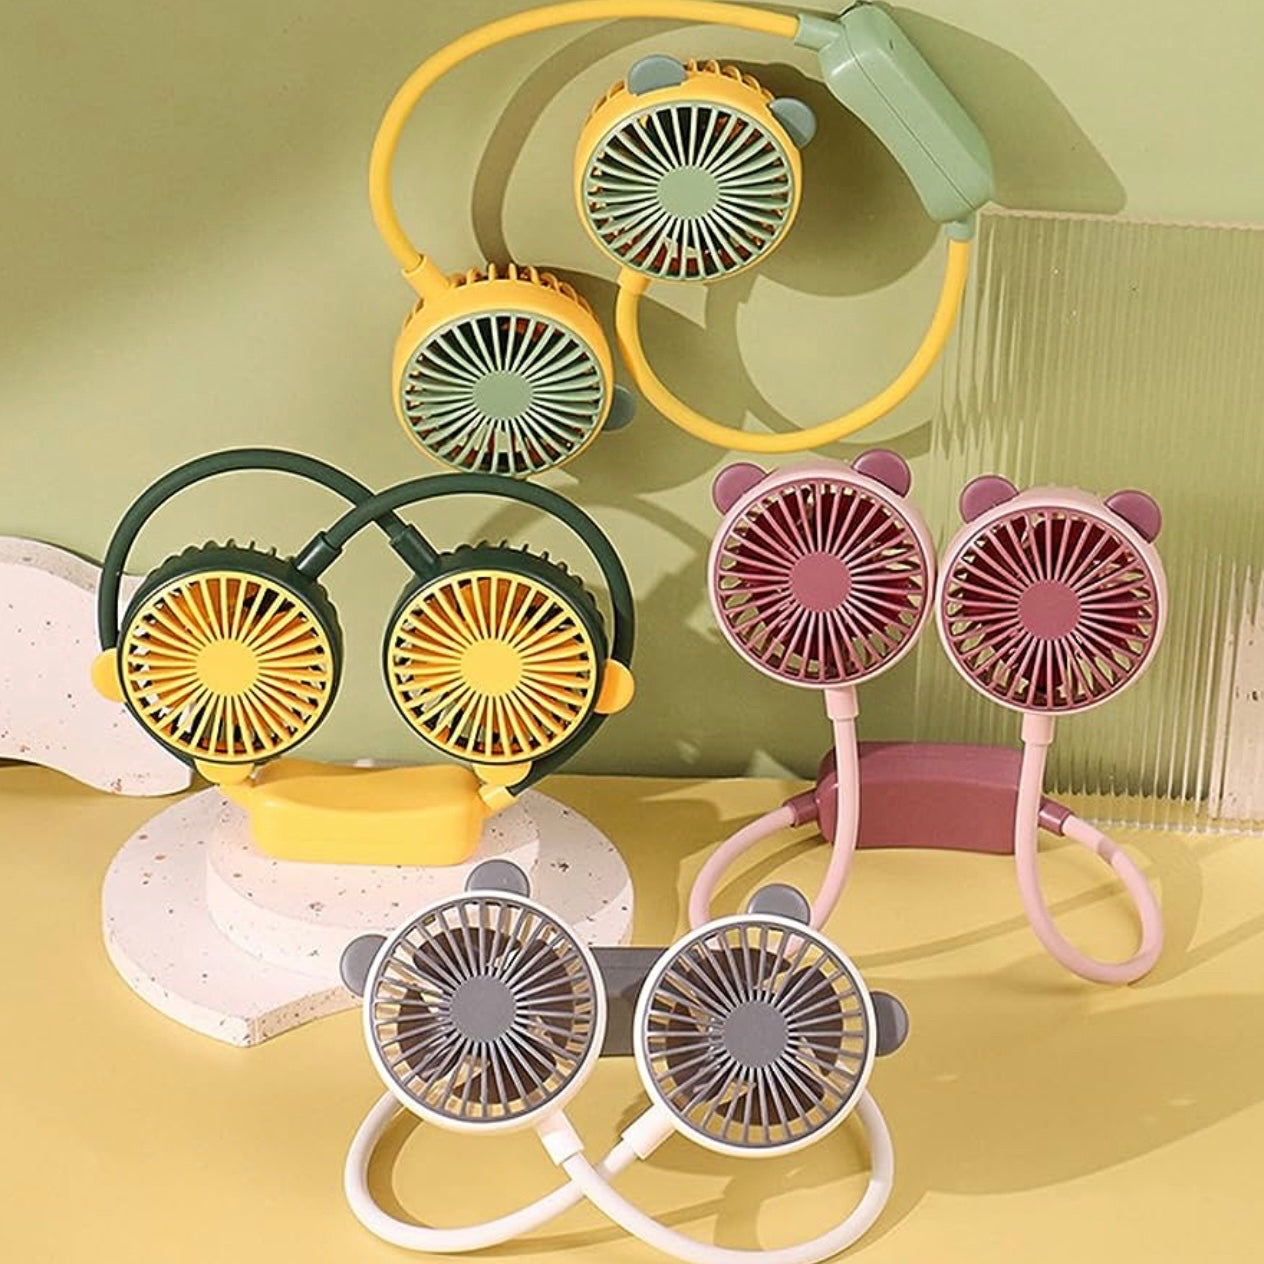 Stay Cool on the Go with Our 360 Degree Rotatable Hand-Free Neck Fan